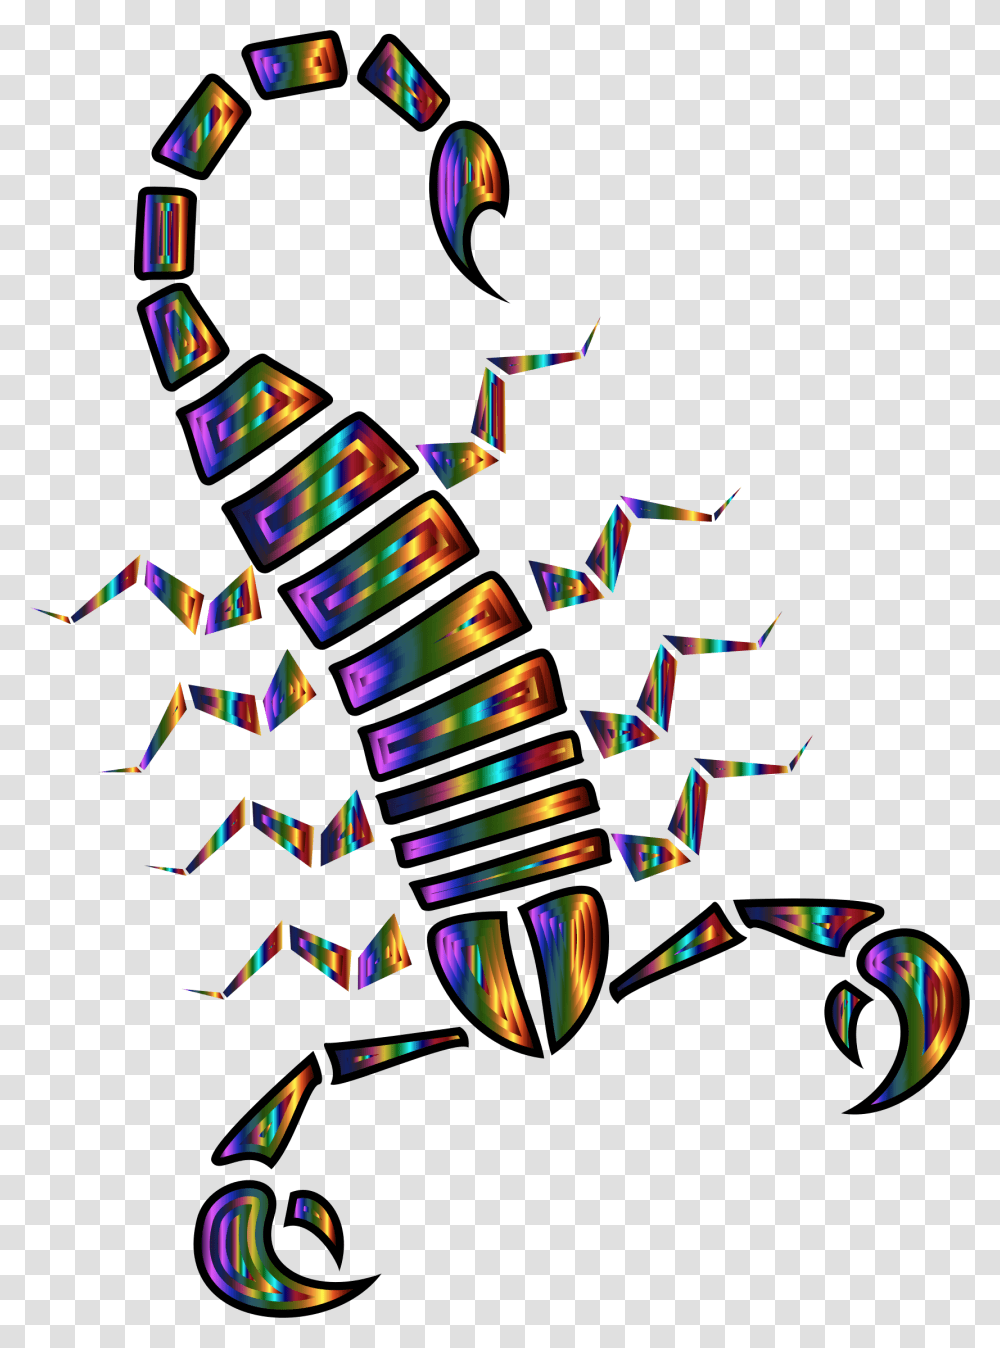 Colorful Abstract Tribal Scorpion 6 Clip Arts Scorpion And Abstract, Animal, Sea Life, Mammal Transparent Png